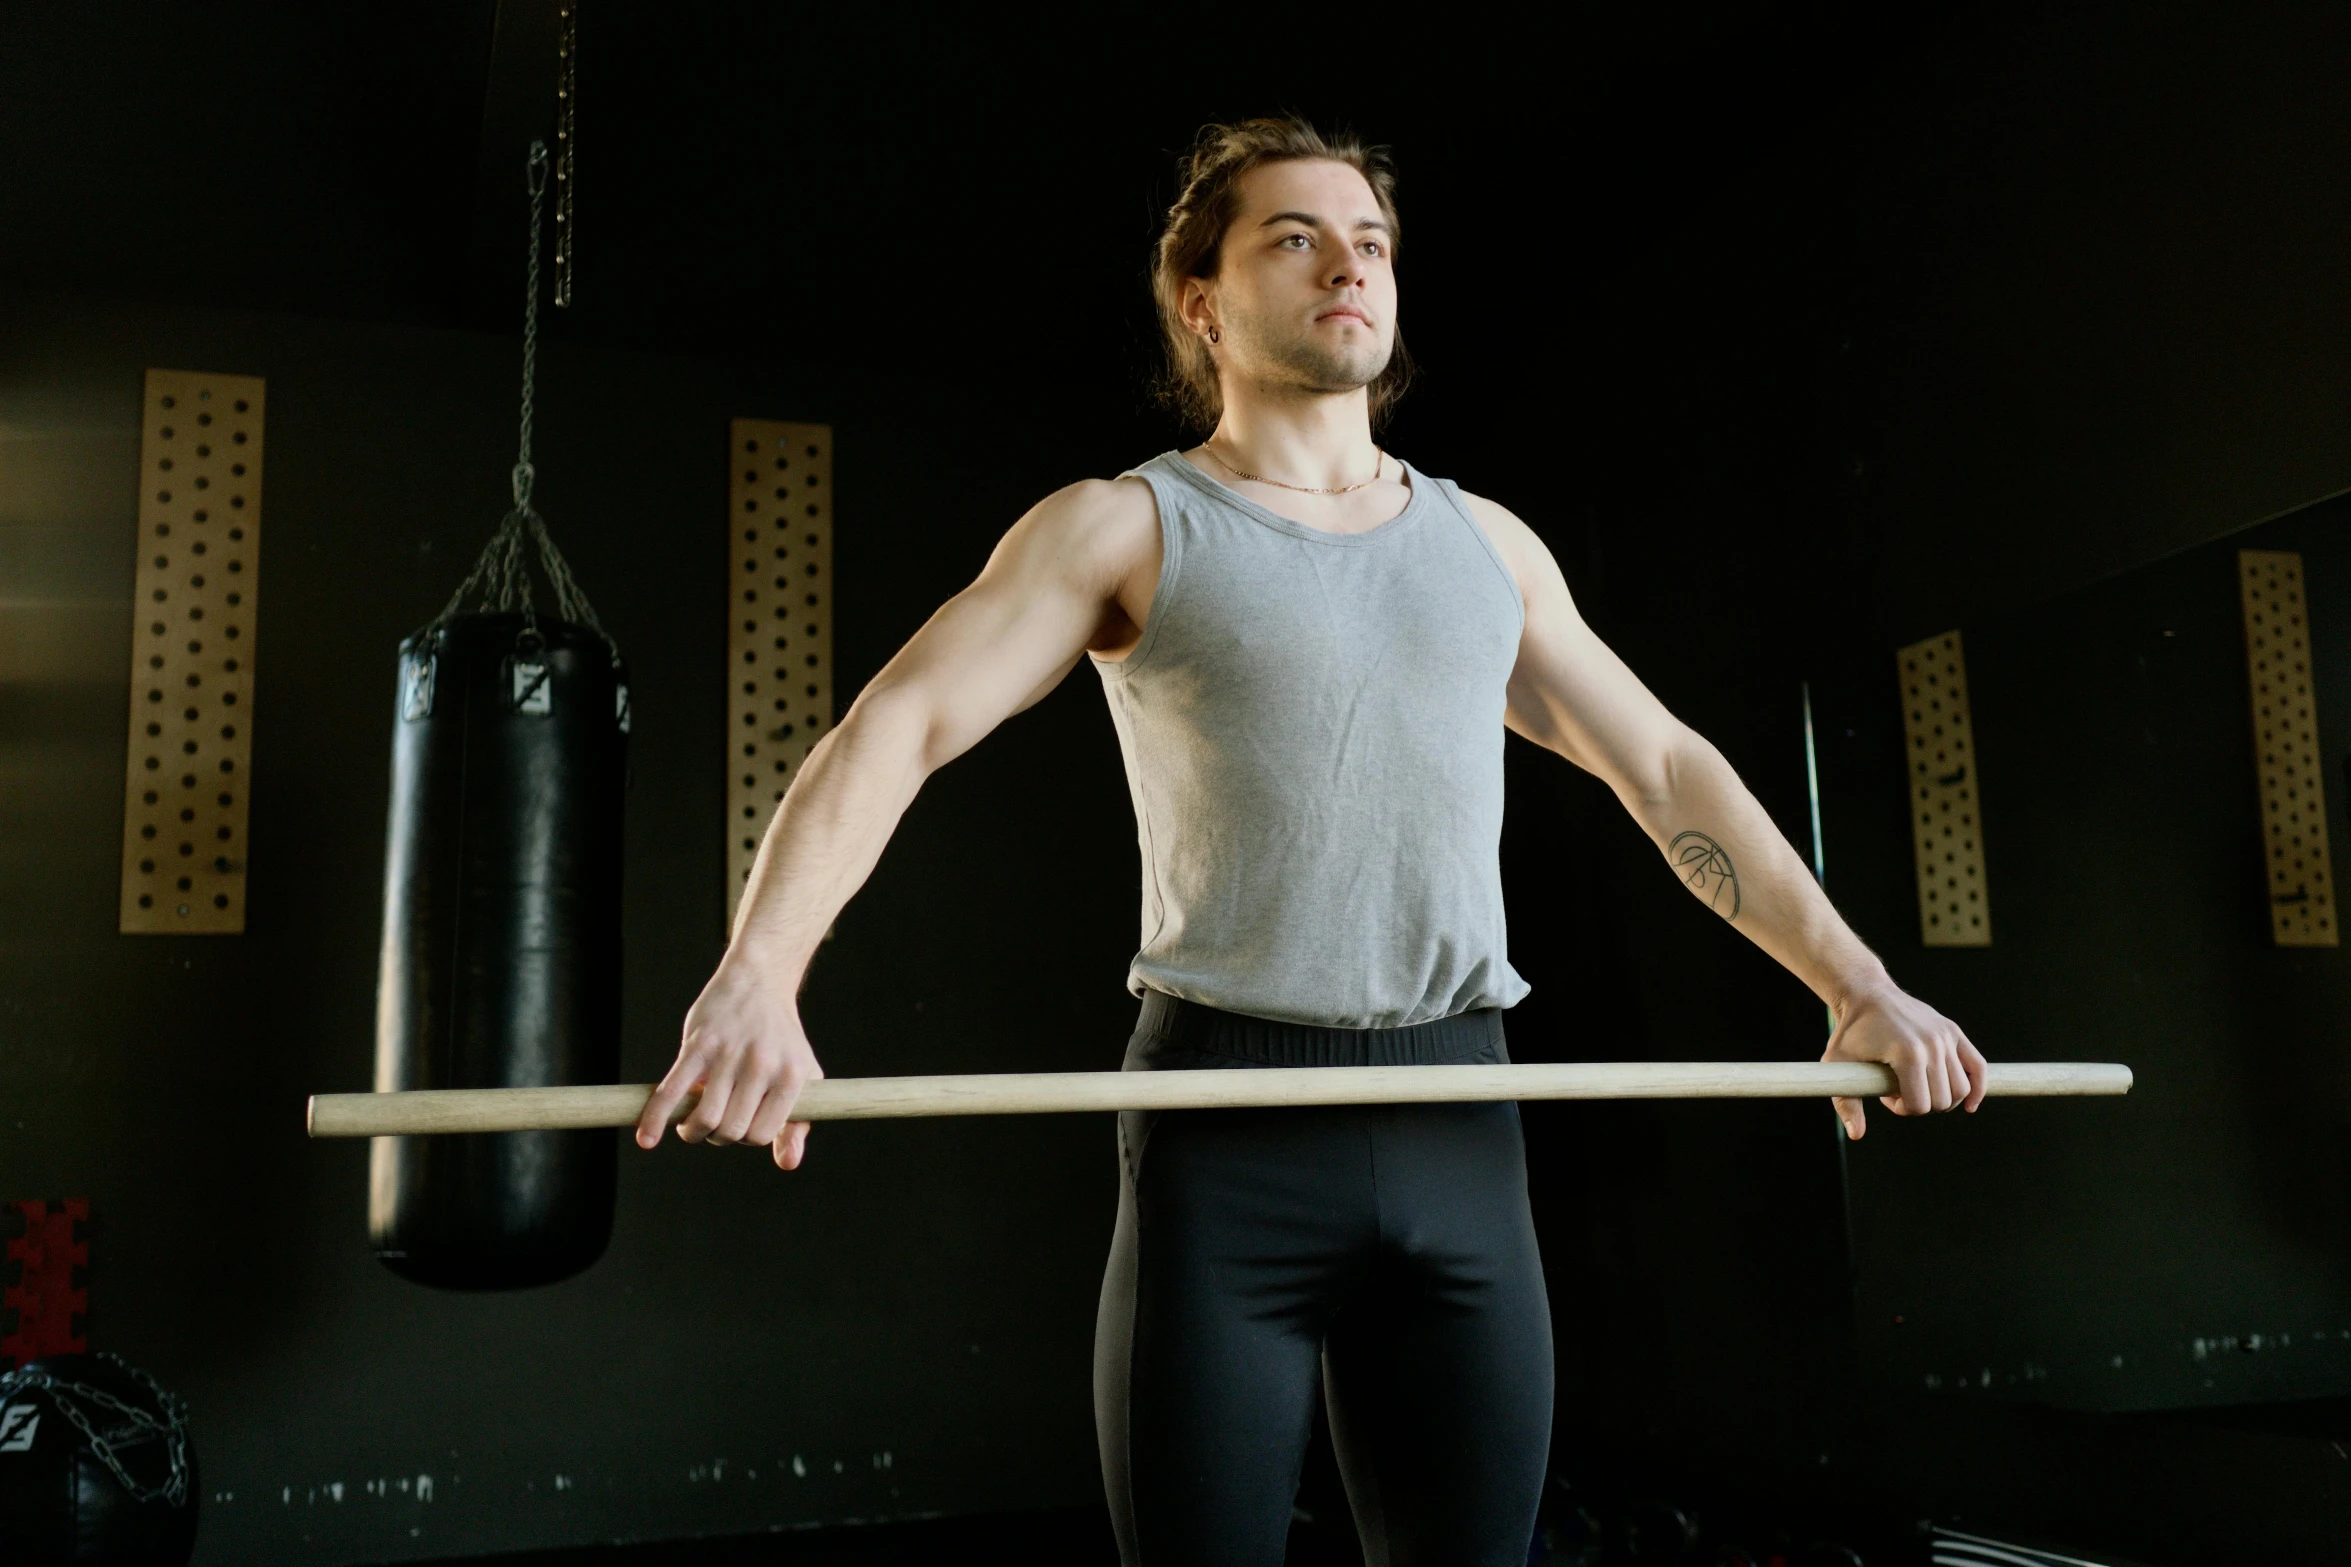 a man holding a pole in a gym, a portrait, pexels contest winner, renaissance, wearing a muscle tee shirt, avatar image, caucasian, barrel chested